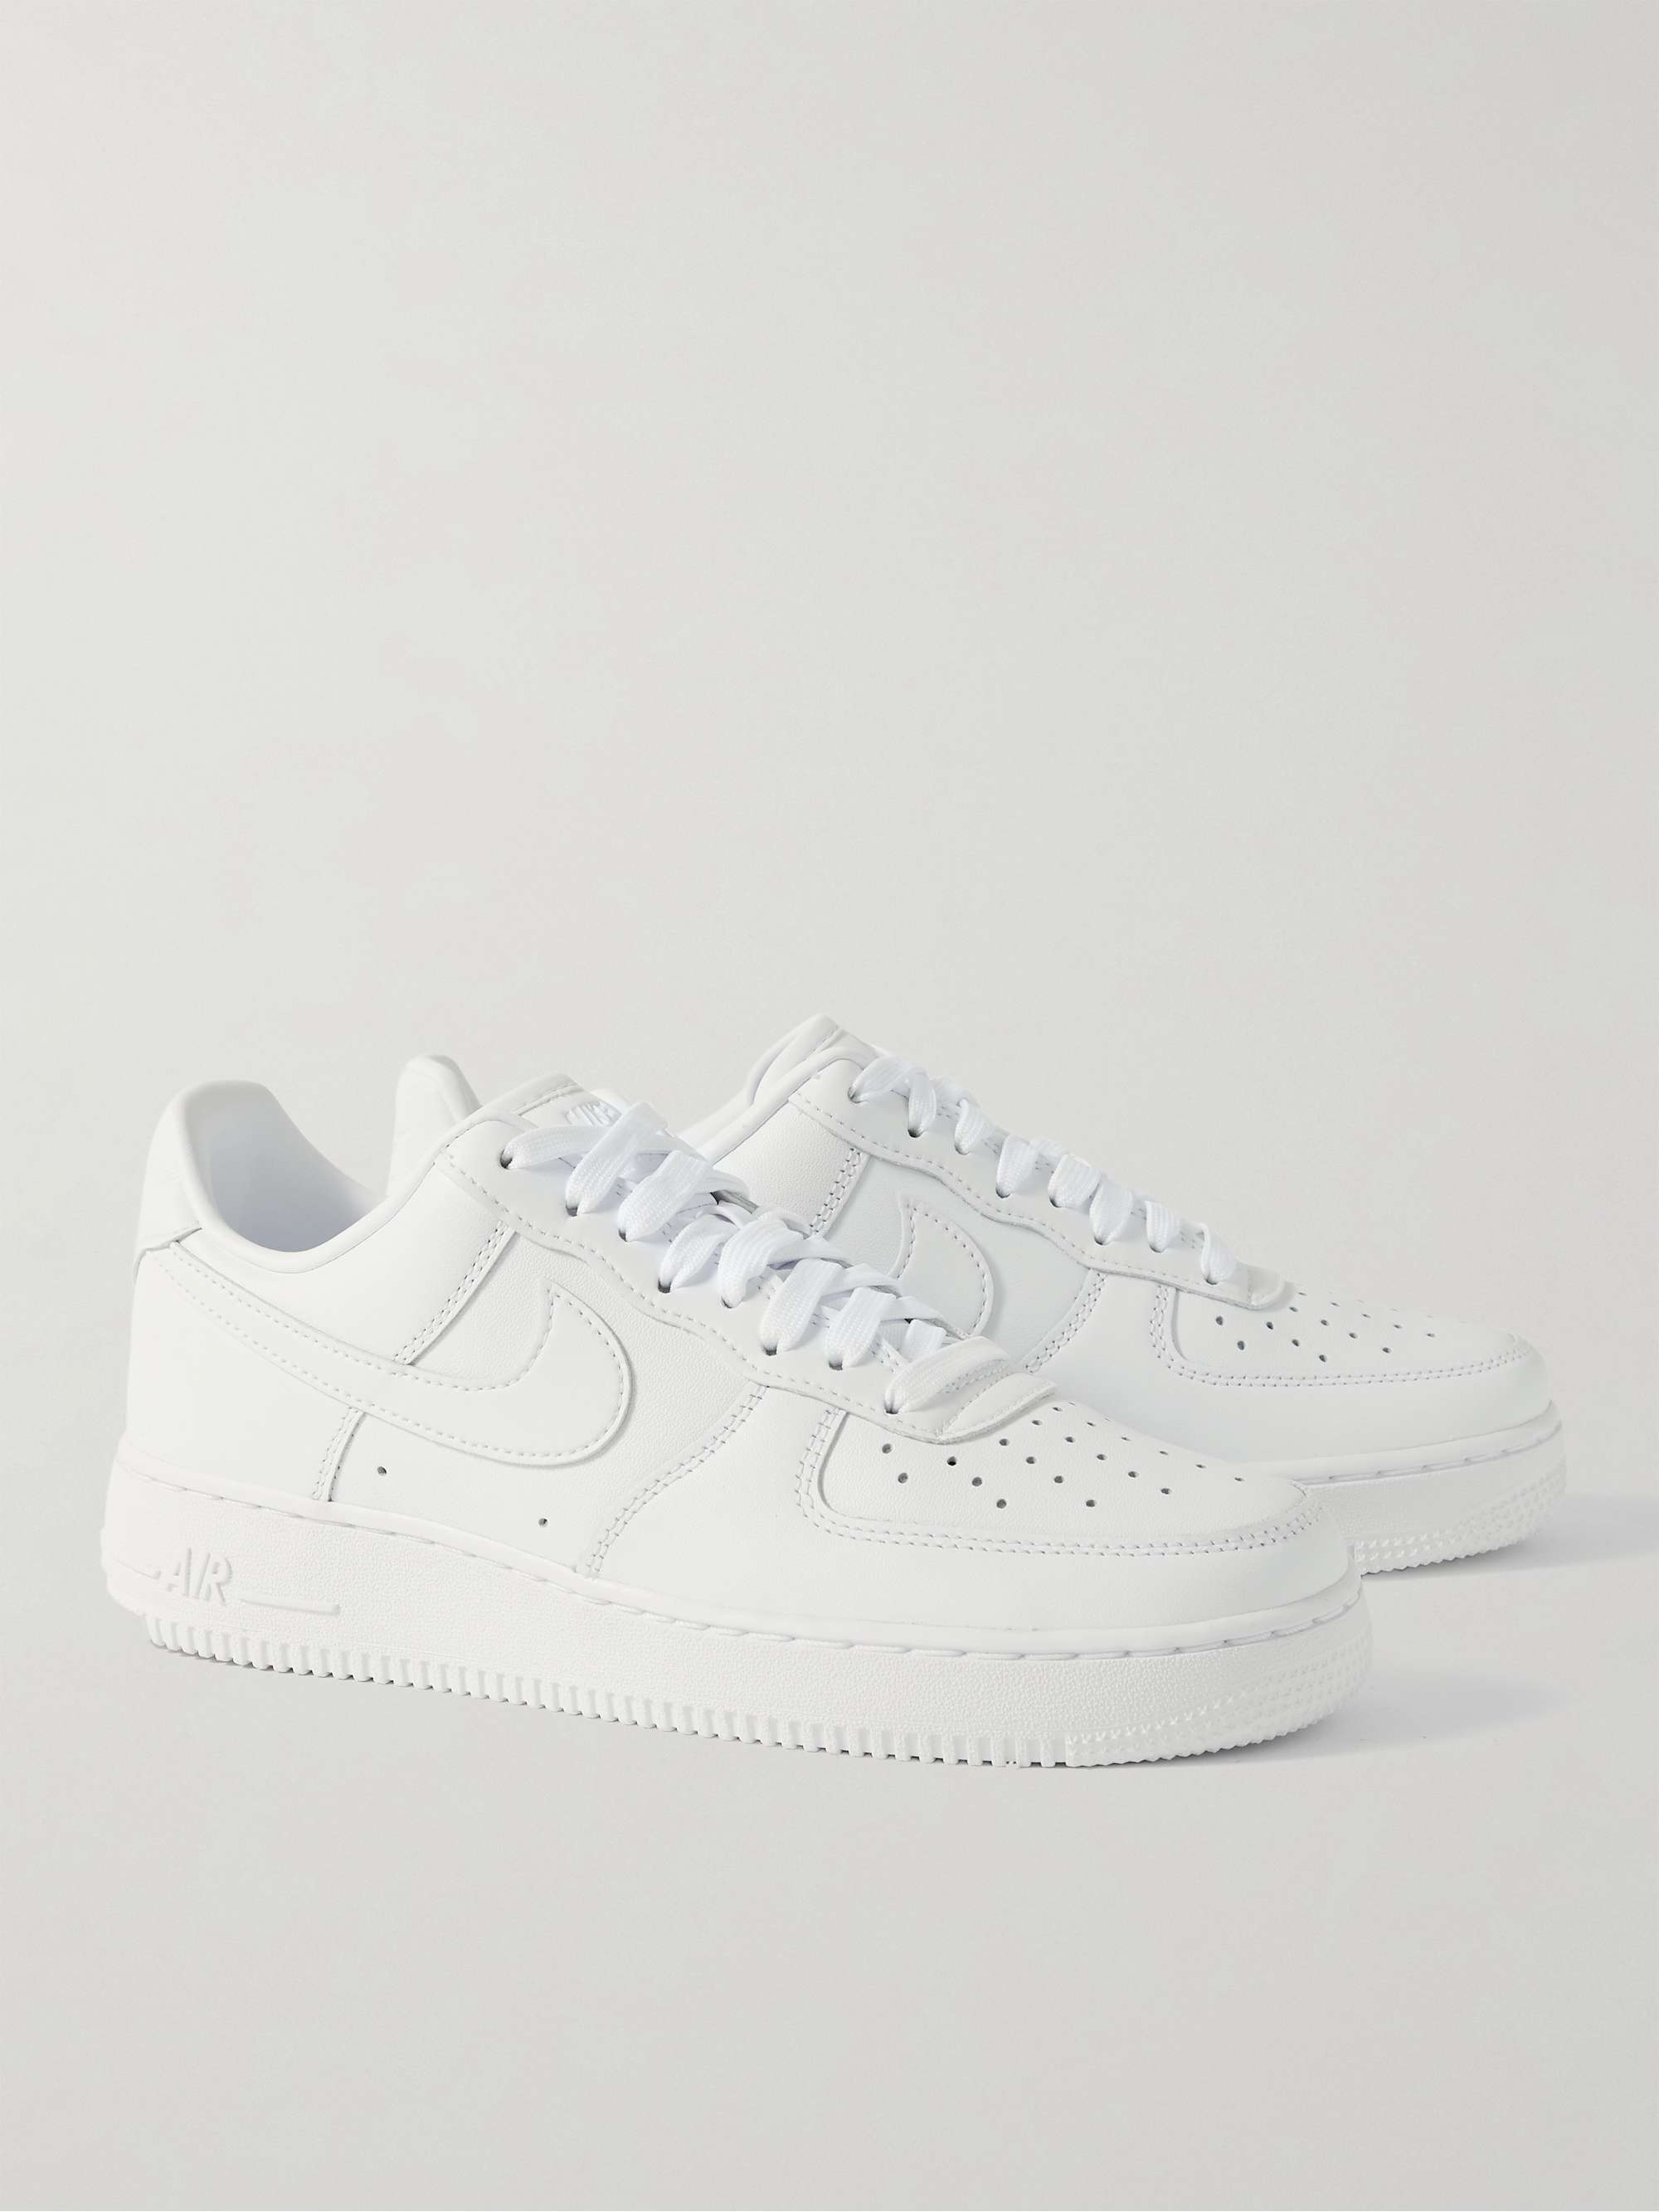 NIKE Air Force 1 '07 Fresh Leather Sneakers | MR PORTER